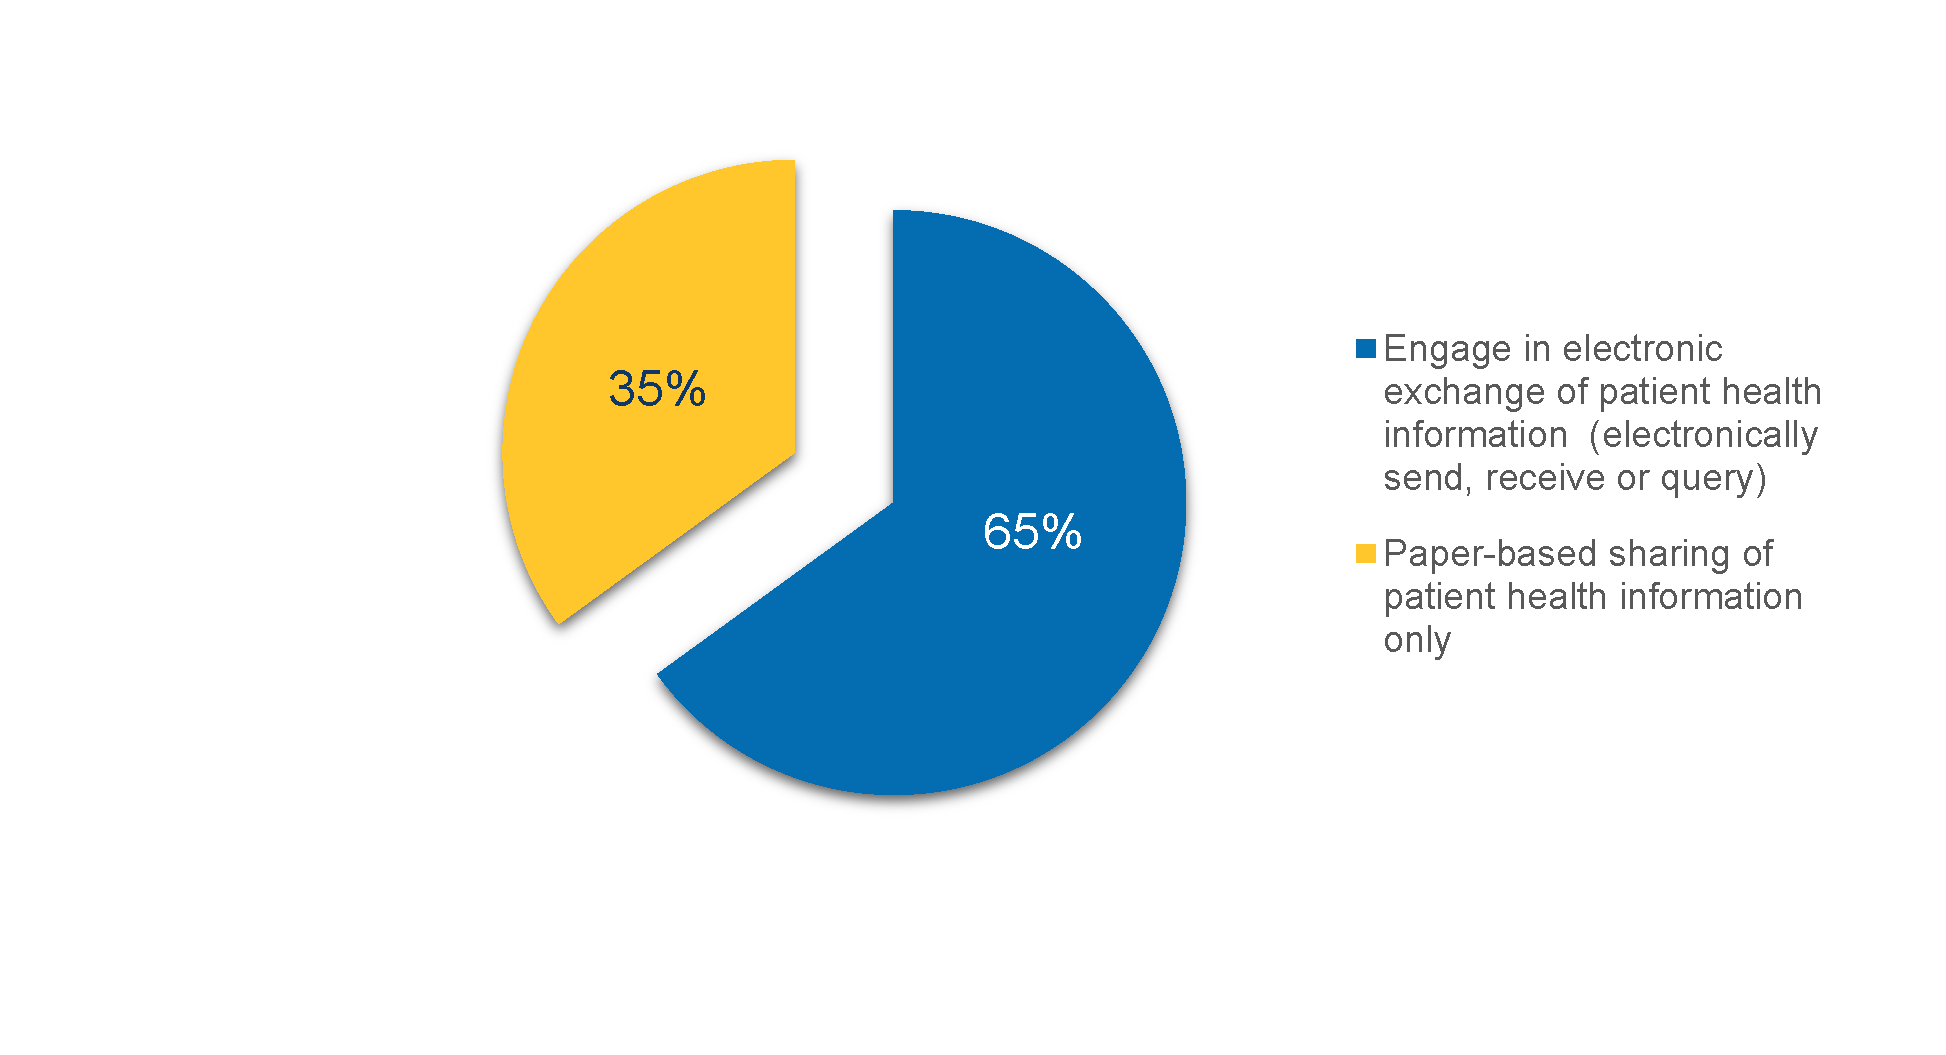 Figure 1. A pie chart showing that 65% of physicians engage in electronic exchange of patient health information (electronically send, receive or query) and 35% of physicians engage in paper-based sharing of patient health information only.